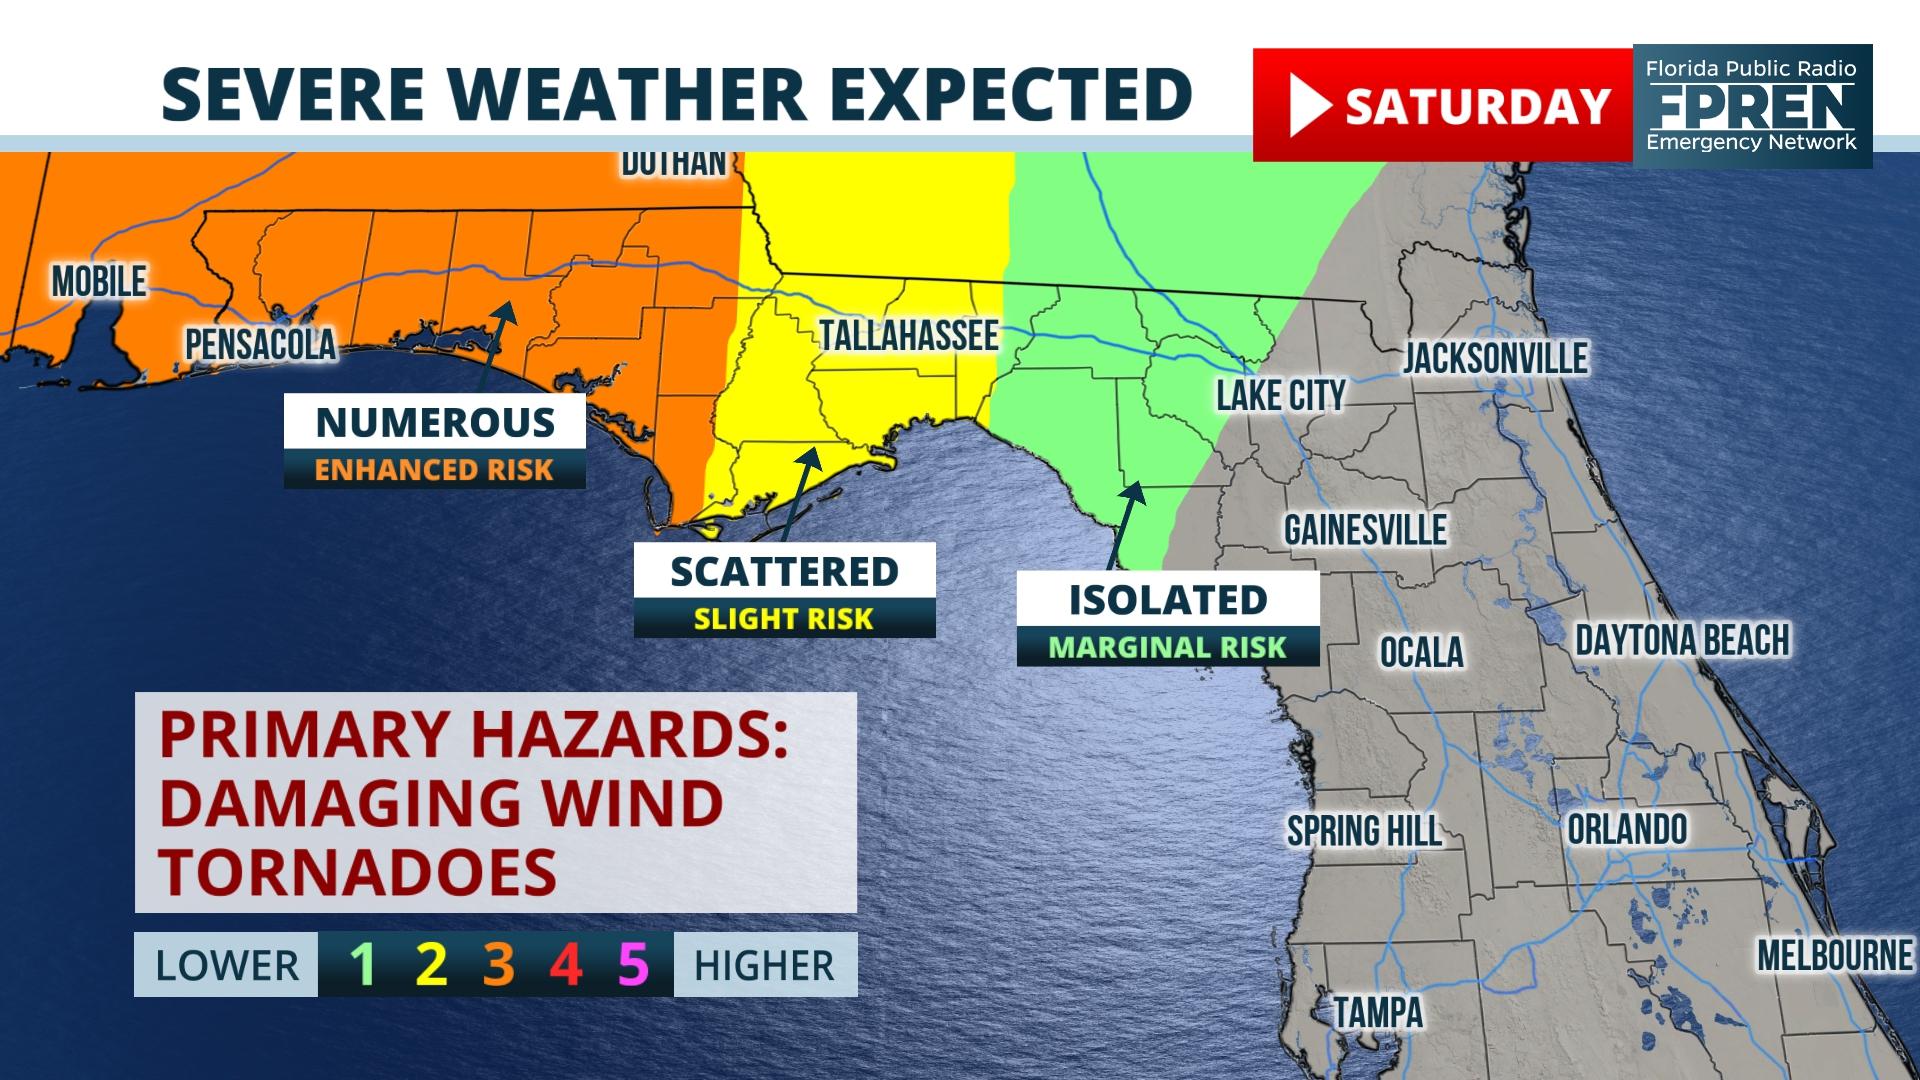 Destructive Squall Line Possible In Florida Panhandle Saturday